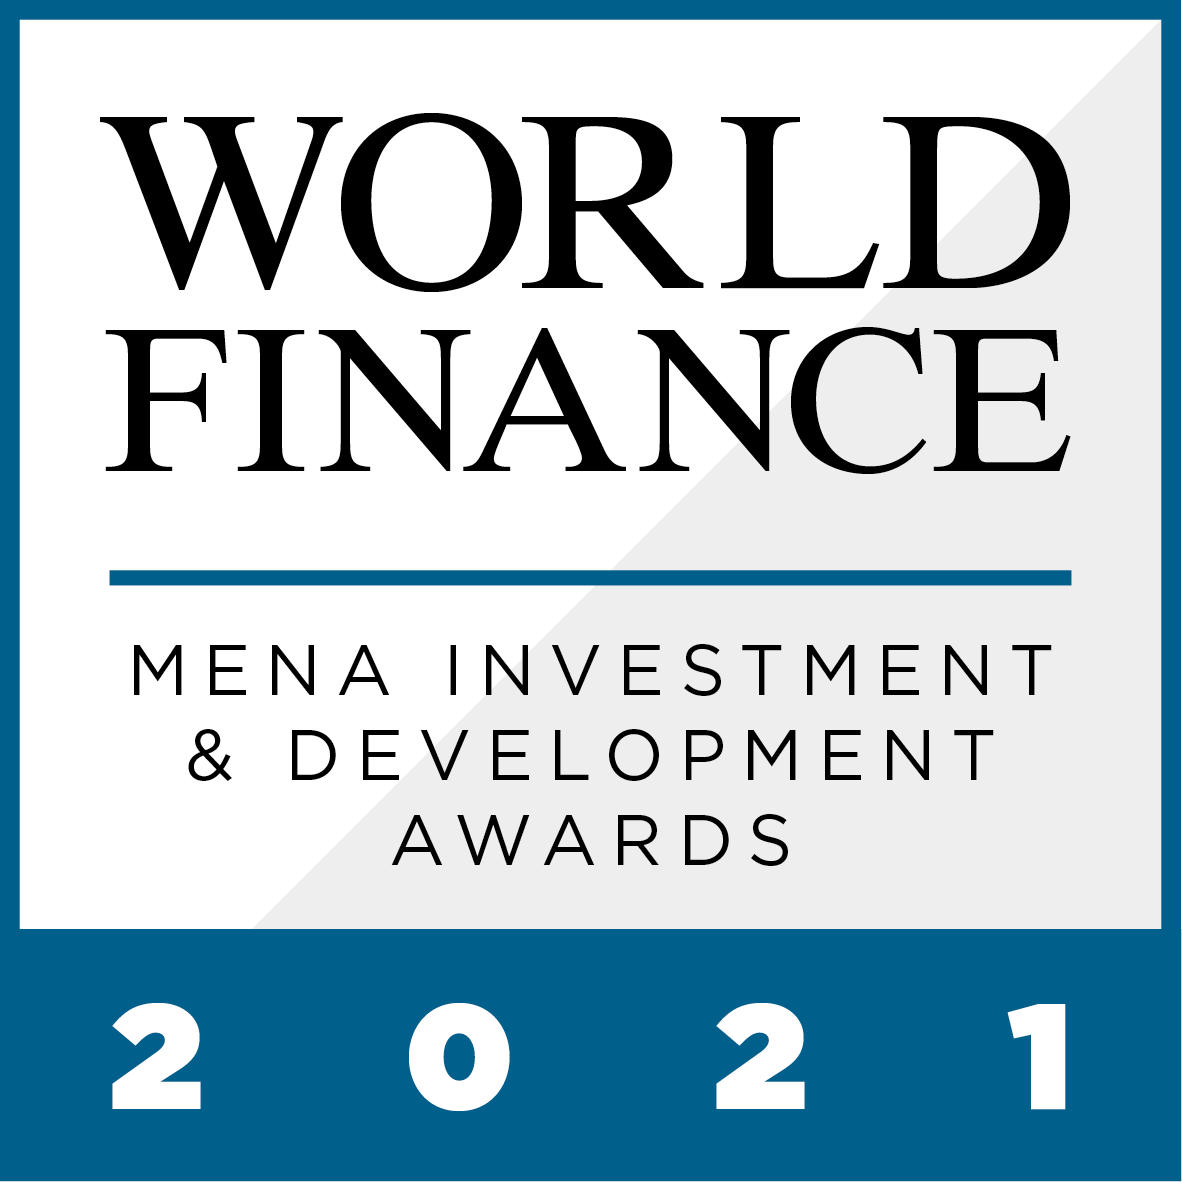 Please see below the full list of the MENA Investment and Development Awards 2021, as awarded by World Finance magazine